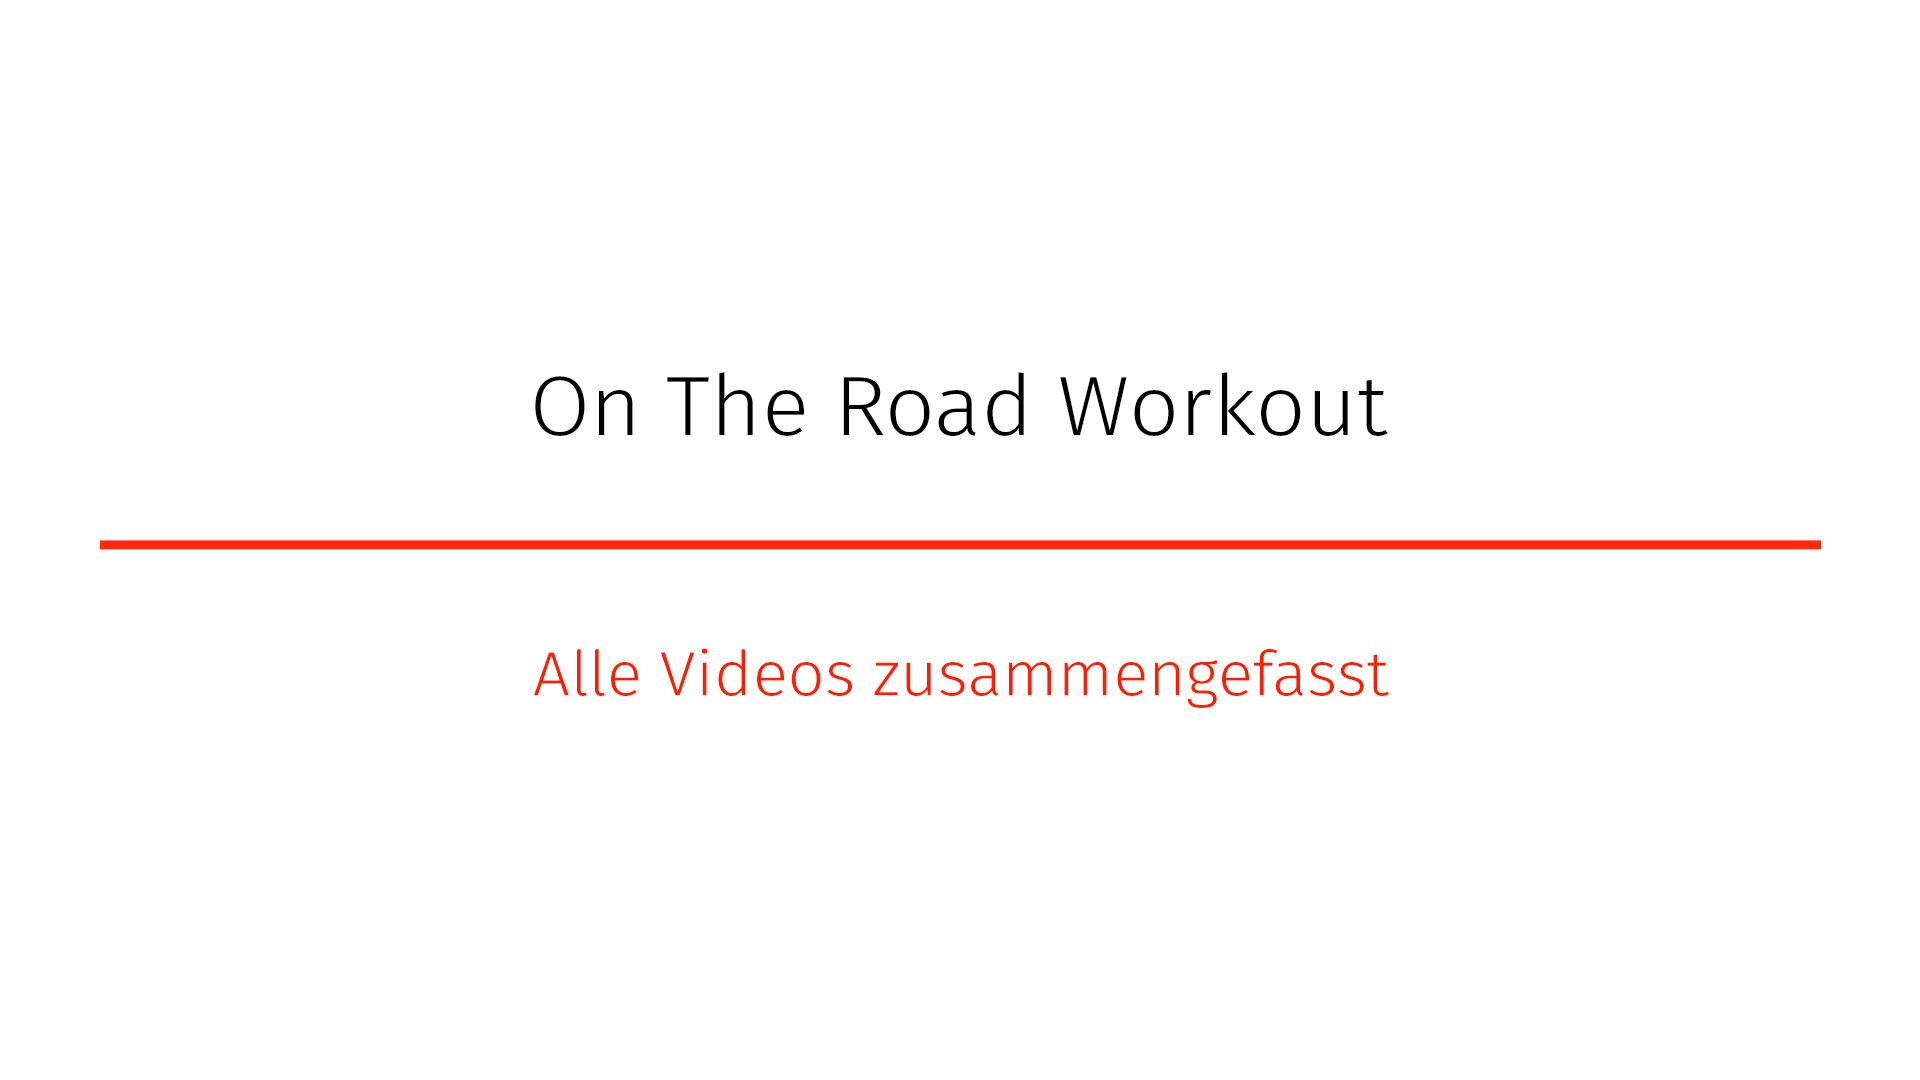 On The Road Workout